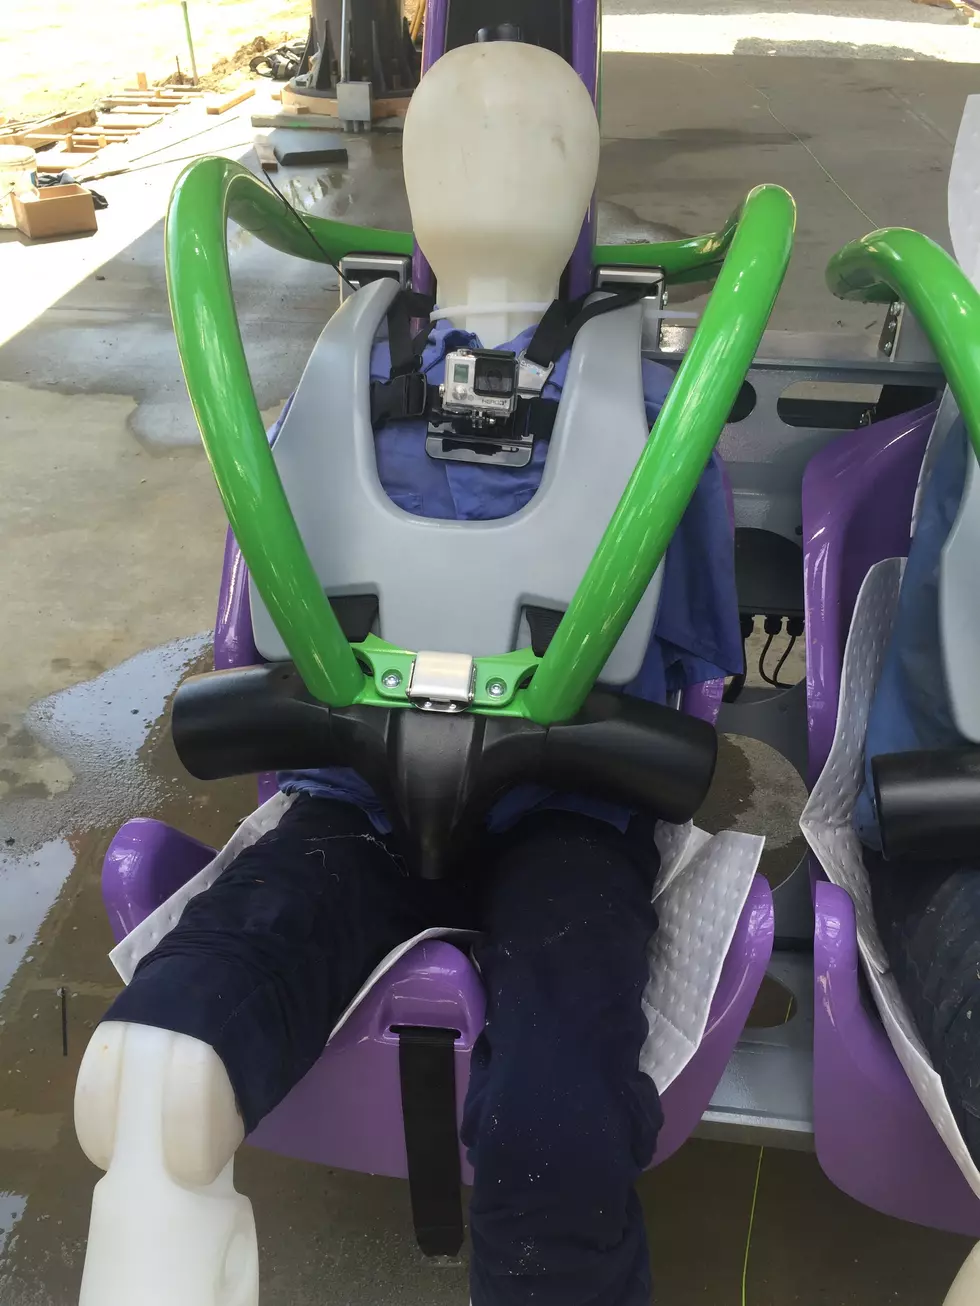 Take A First Look At Great Adventure&#8217;s The Joker In Action [Video]